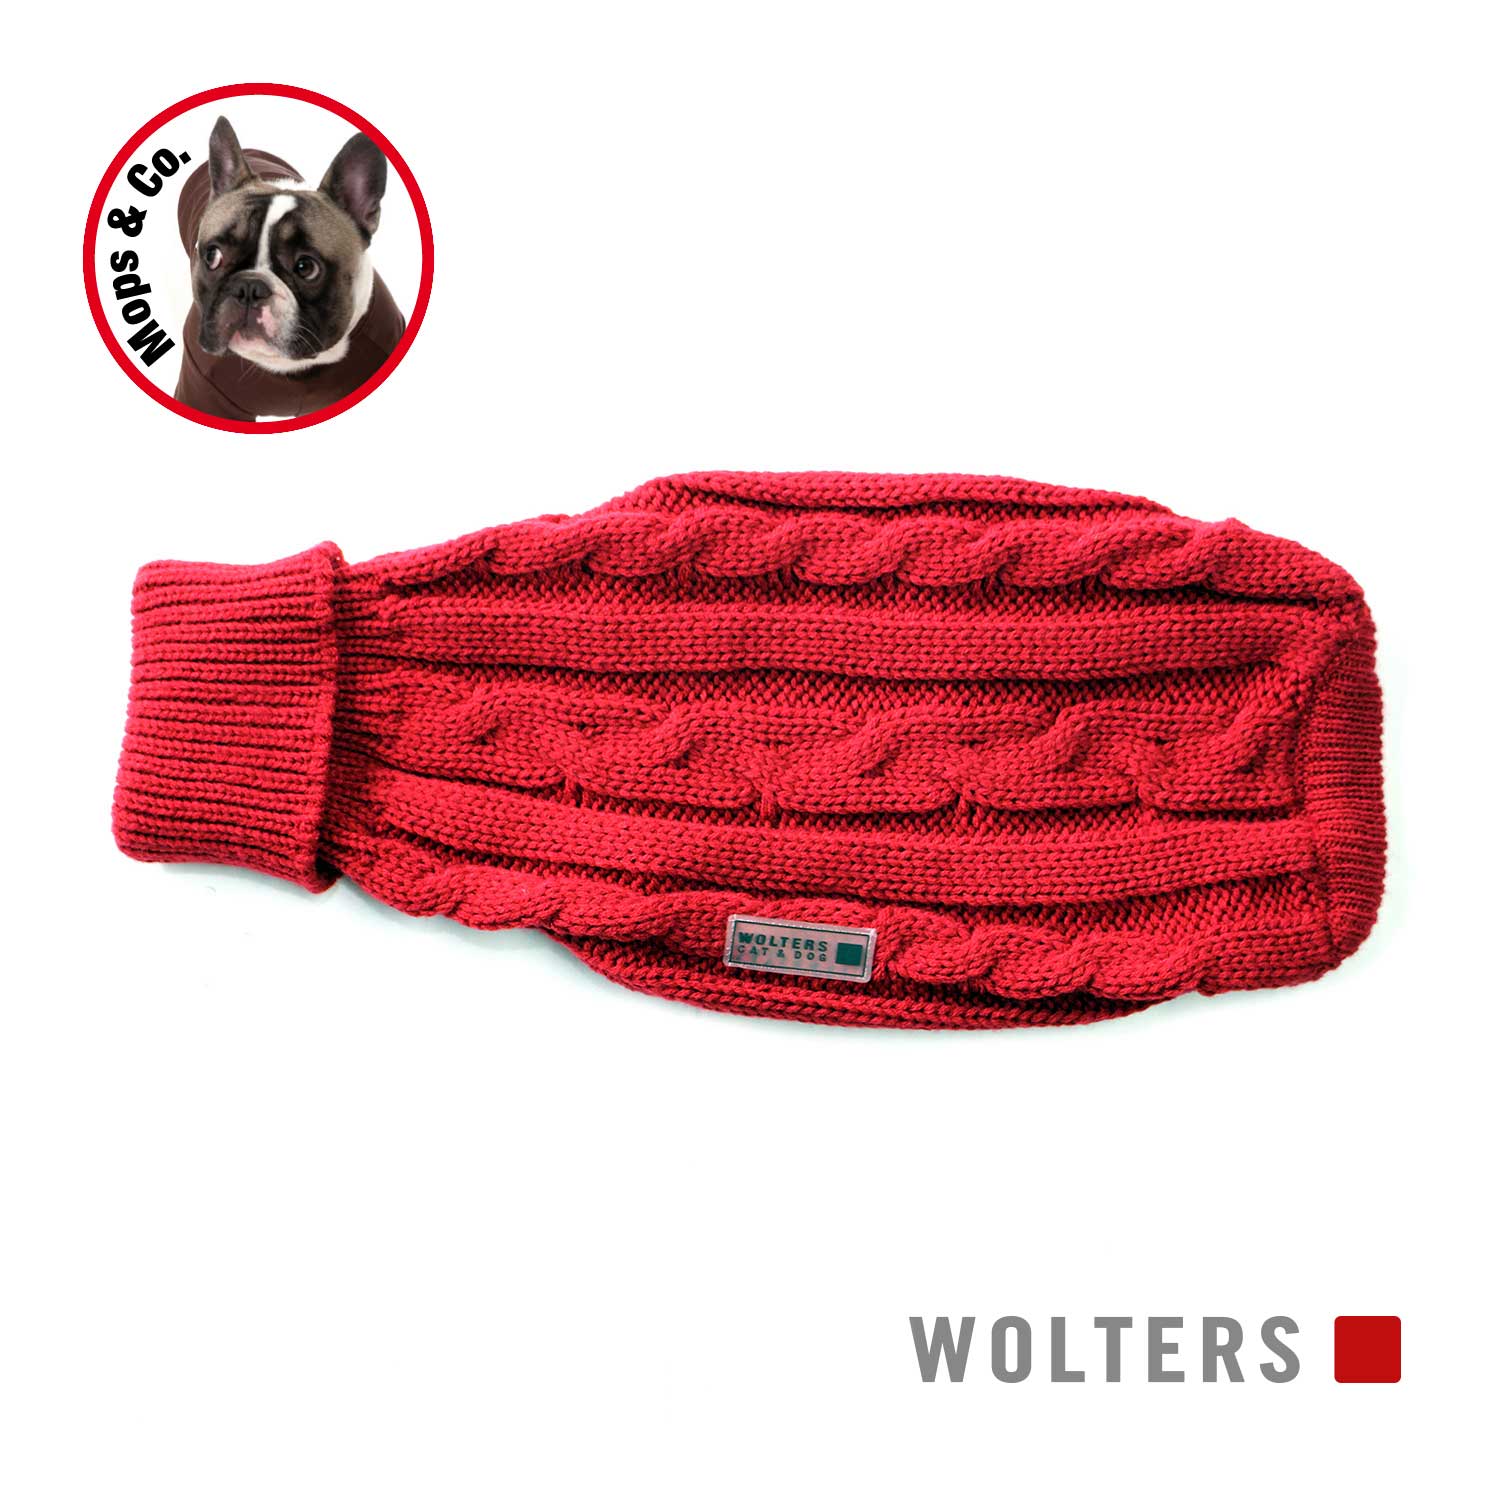 Wolters Zopf-Strickpullover für Mops & Co. - rot